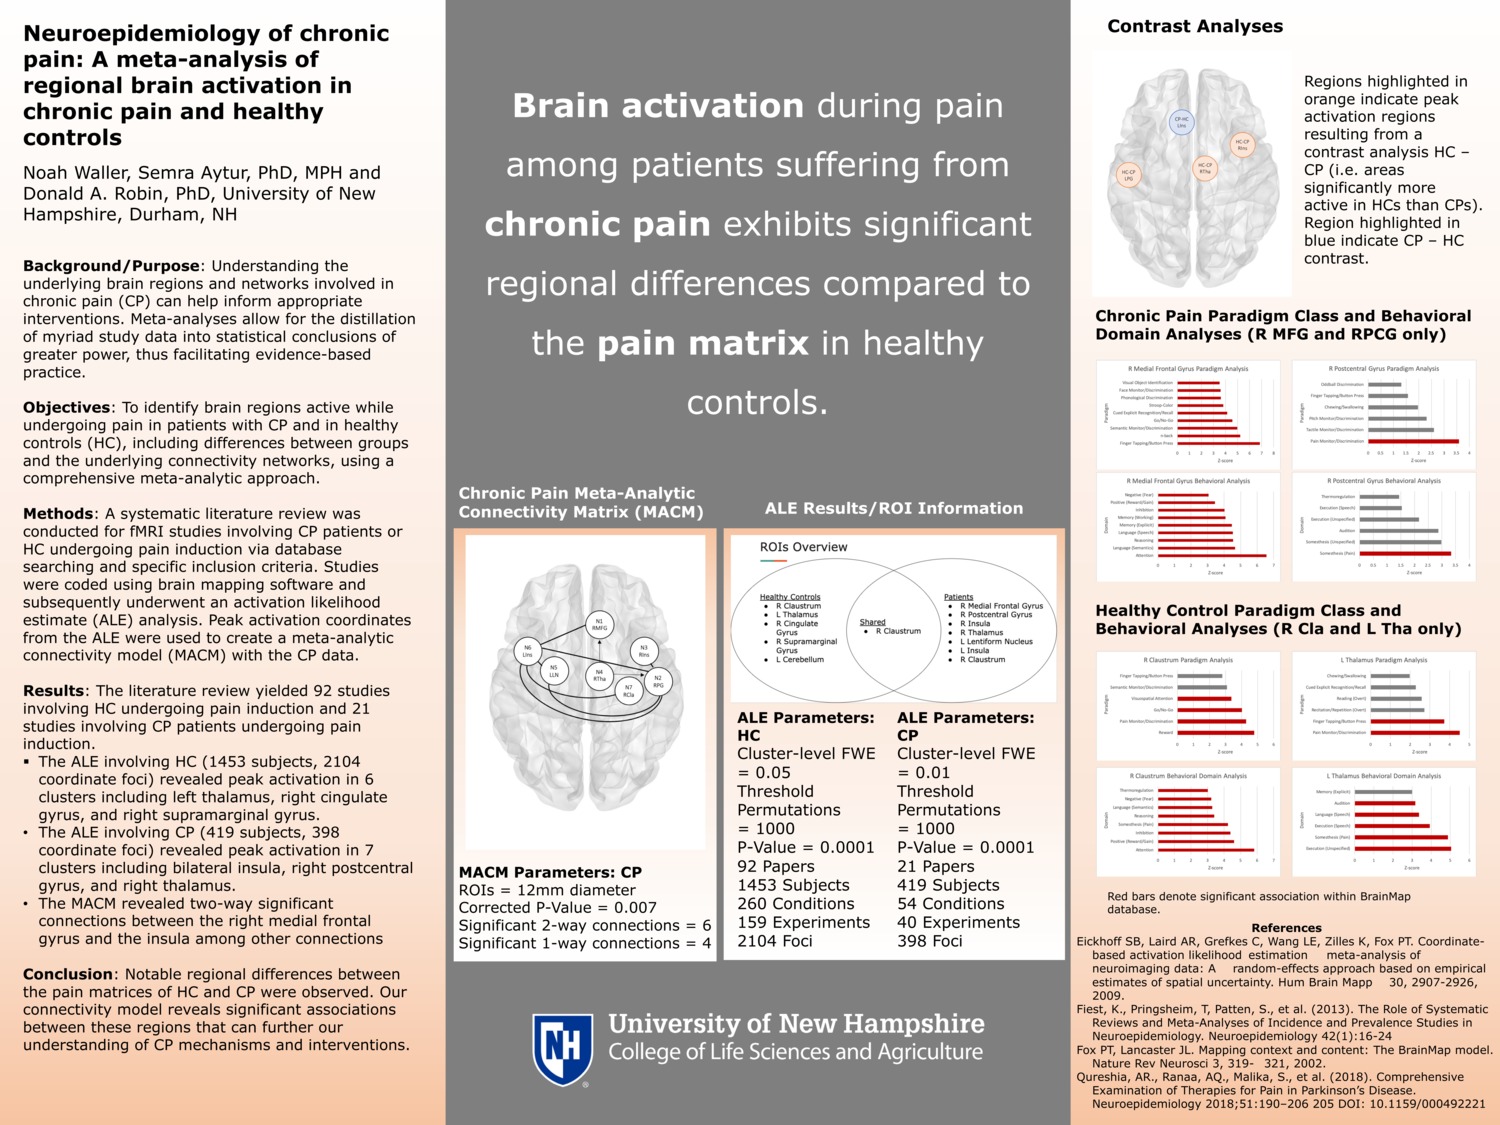 Neuroepidemiology Of Chronic Pain: A Meta-Analysis Of Regional Brain Activation In Chronic Pain And Healthy Controls by ncw1004